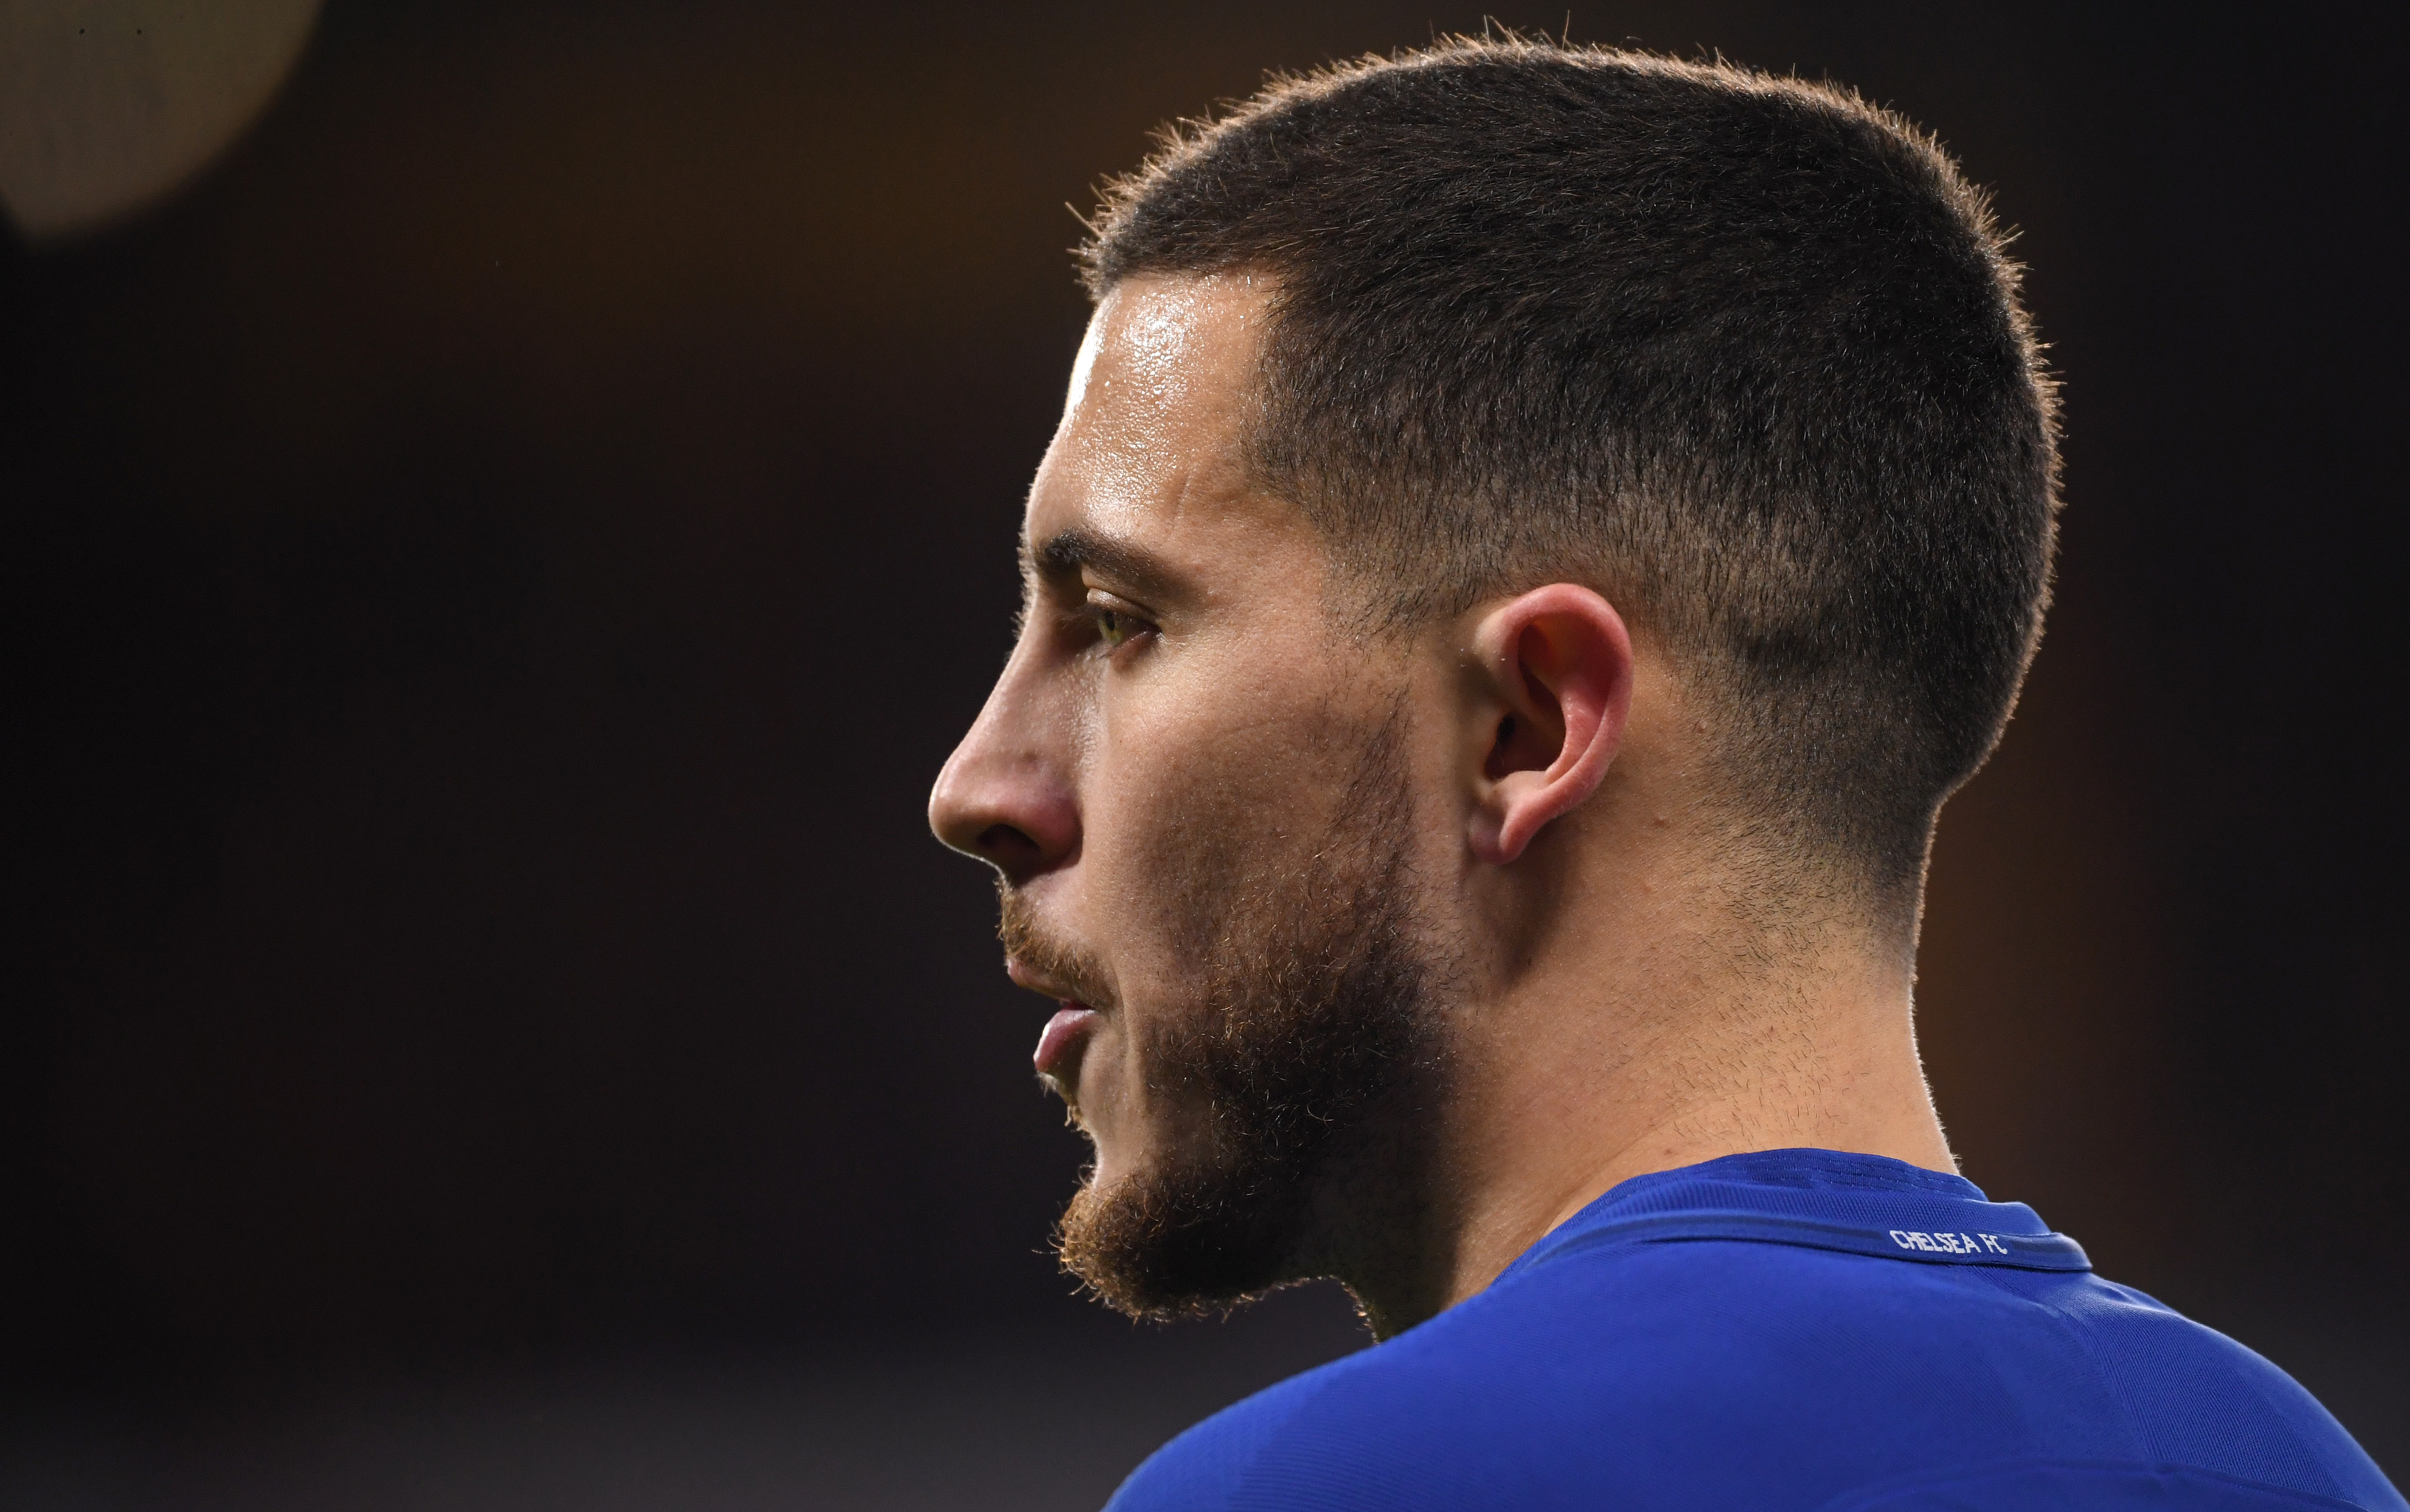 LONDON, ENGLAND - FEBRUARY 12:  Eden Hazard of Chelsea looks on during the Premier League match between Chelsea and West Bromwich Albion at Stamford Bridge on February 12, 2018 in London, England.  (Photo by Mike Hewitt/Getty Images)